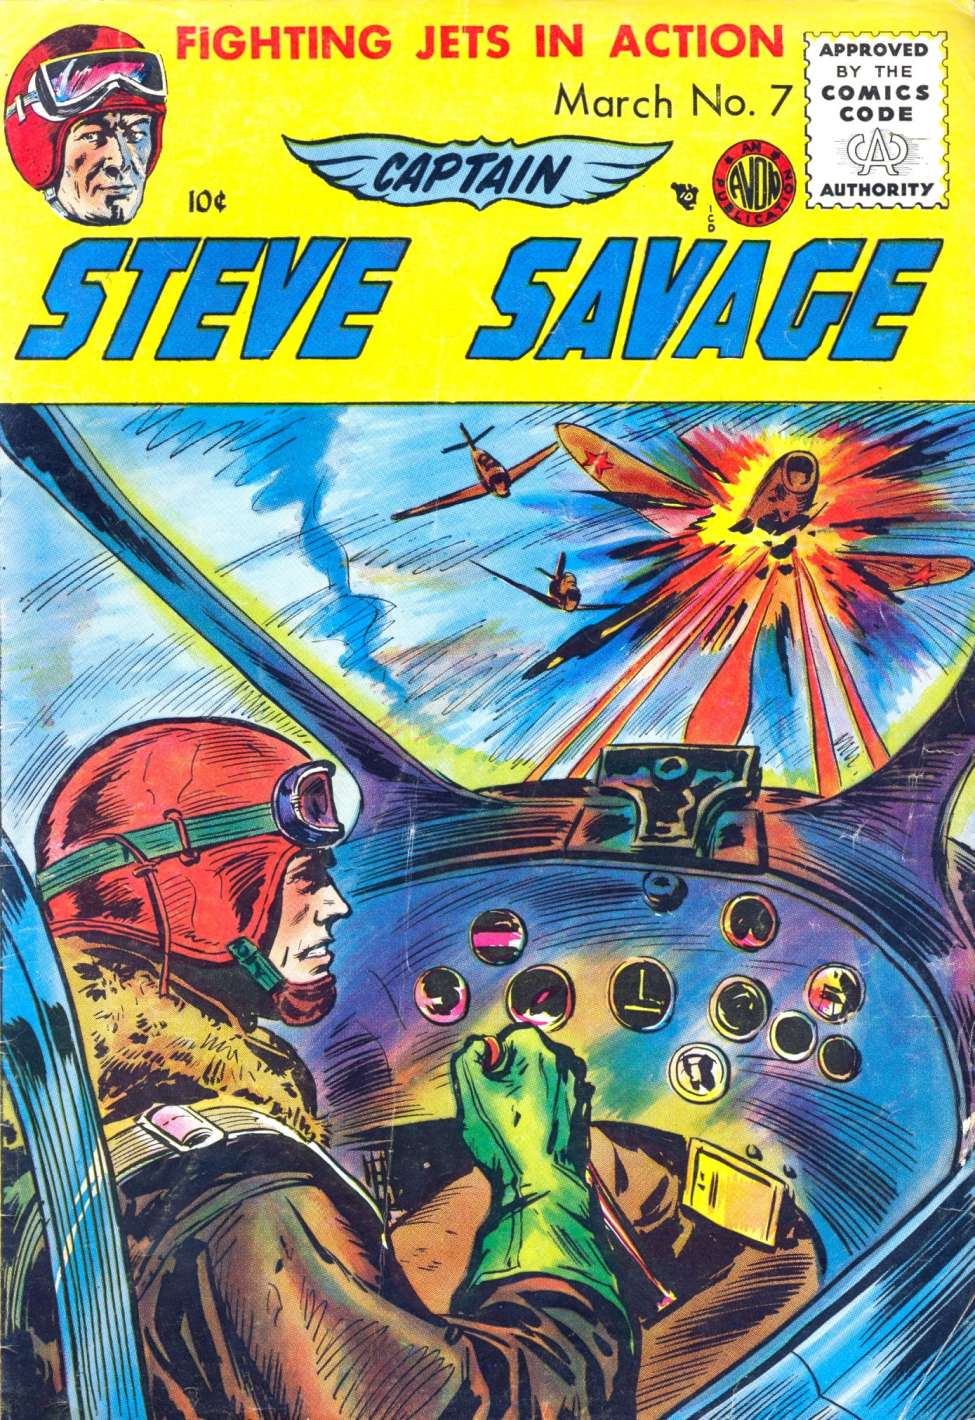 Comic Book Cover For Captain Steve Savage v2 7